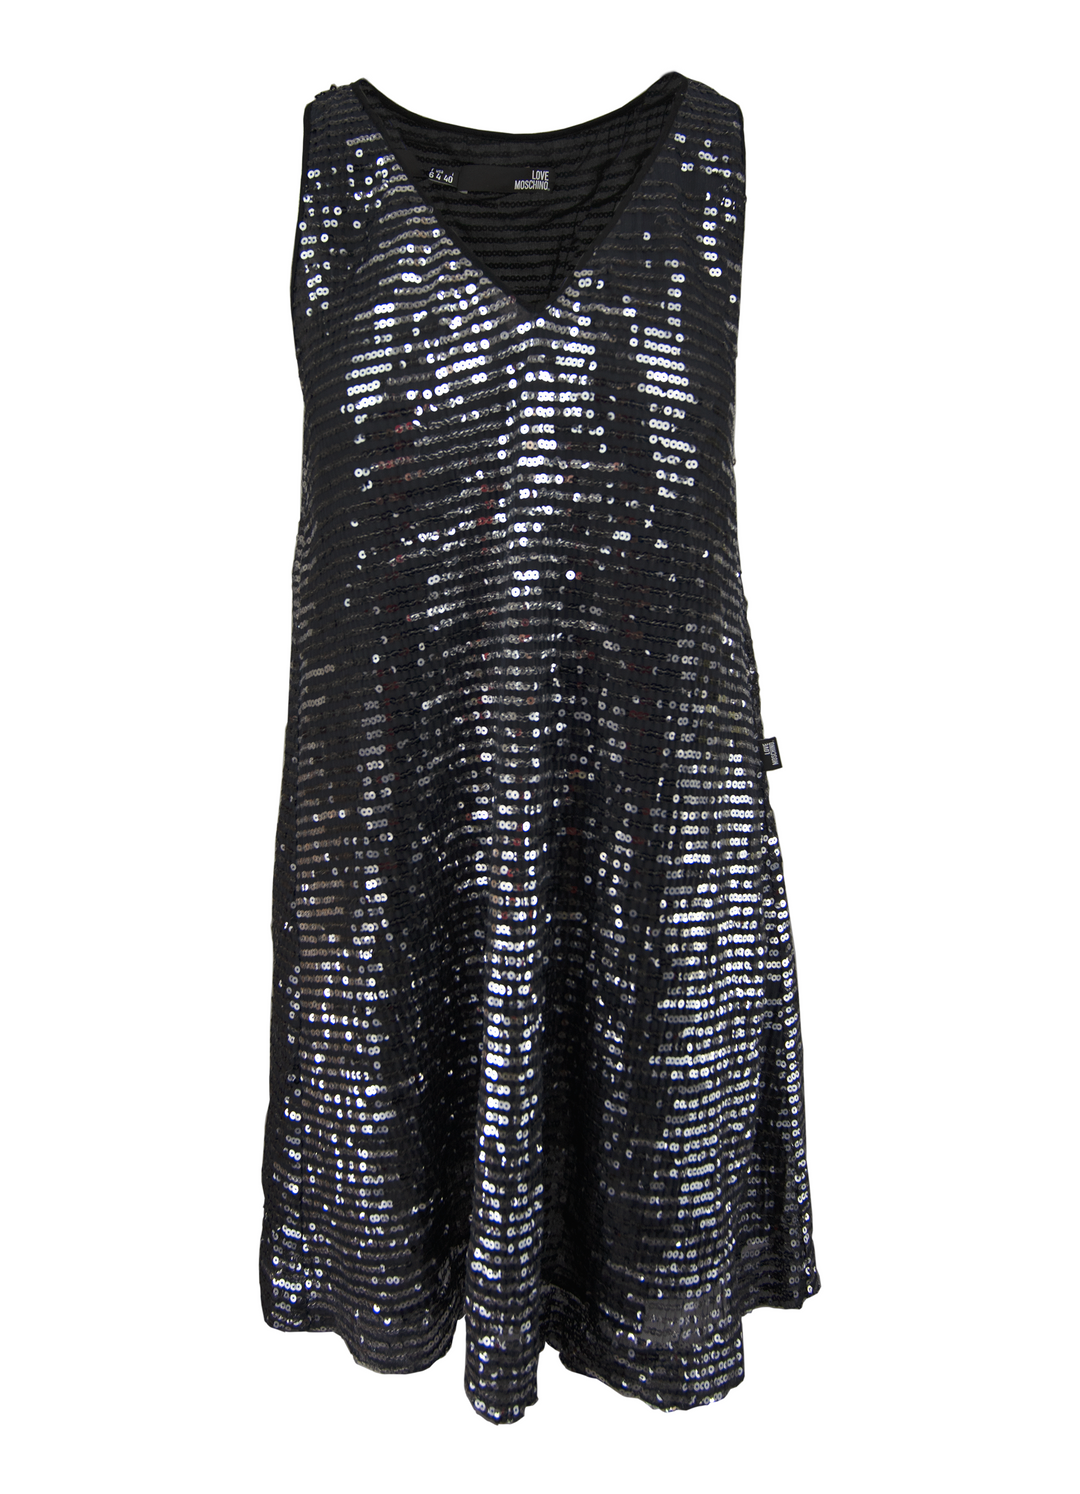 Moschino Black & Silver Sequin Dress Veronique Luxury Collections